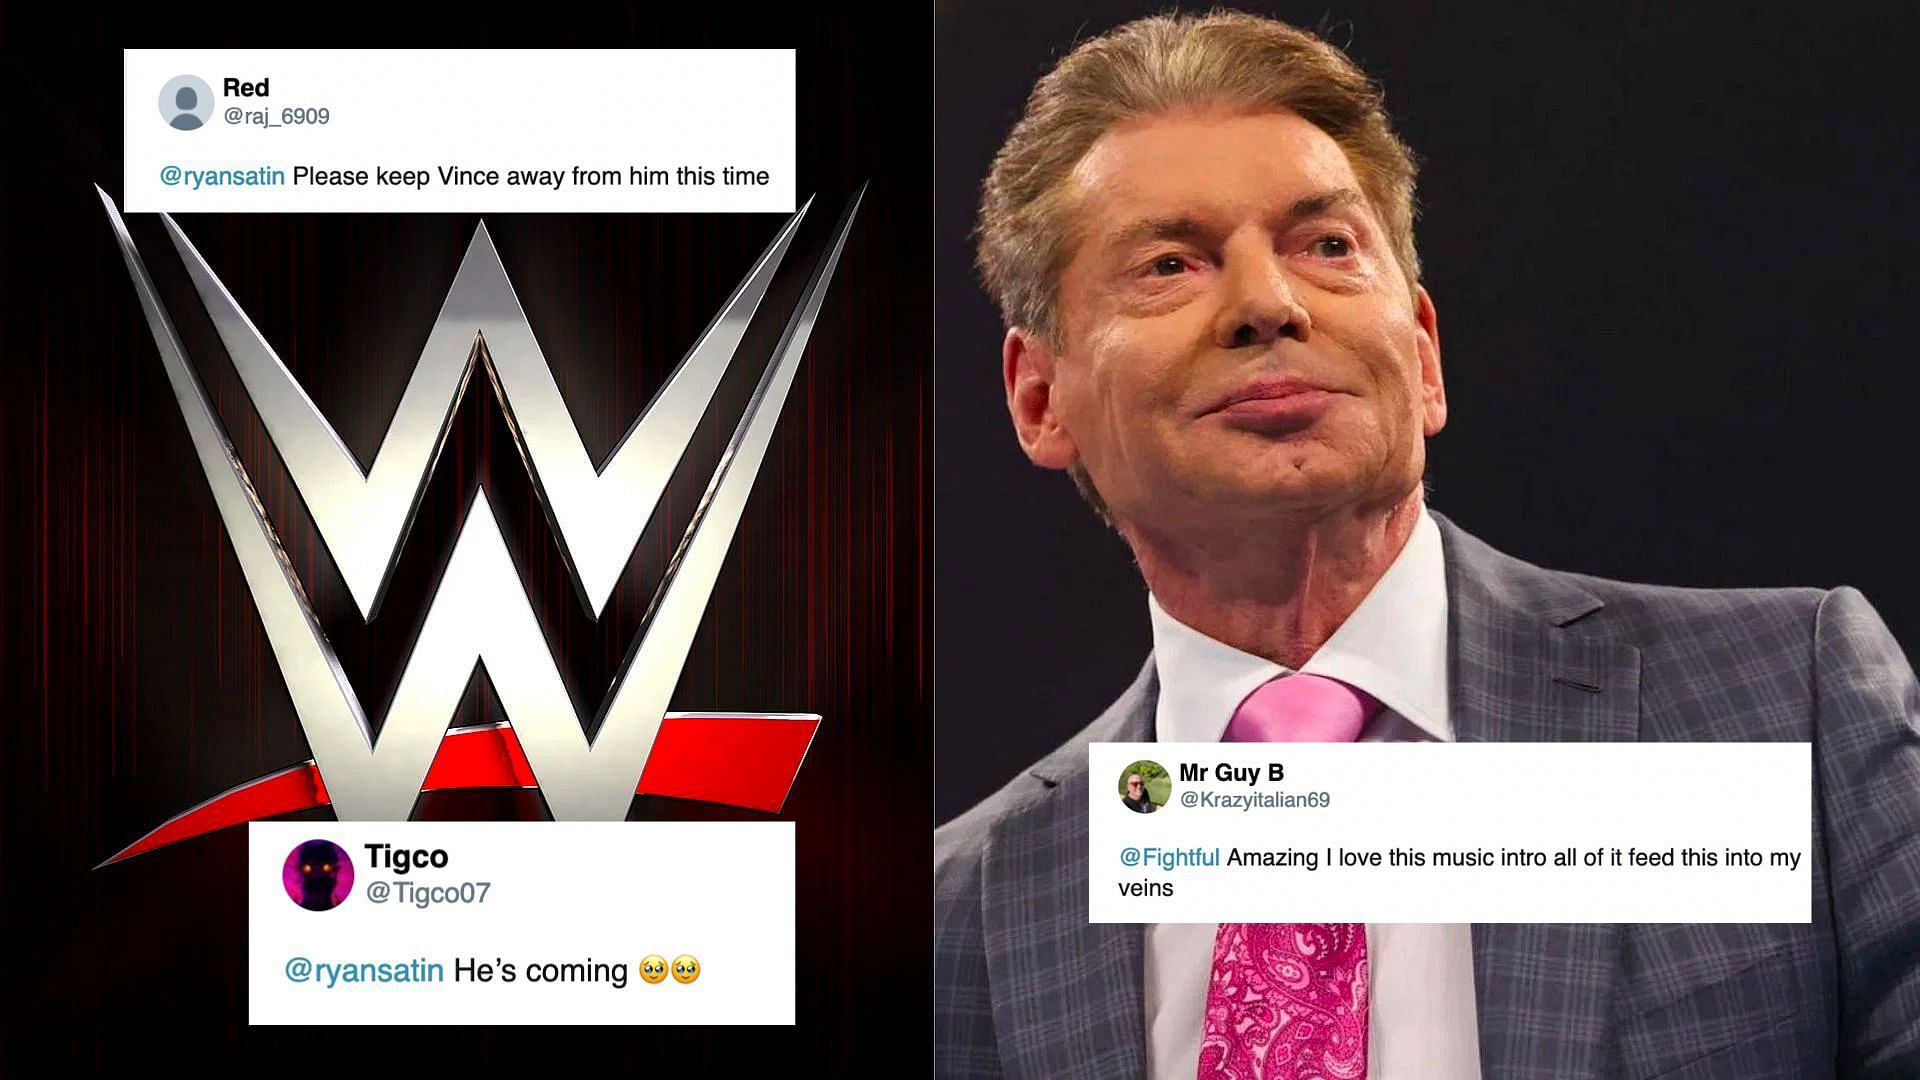 Vince McMahon has released many WWE stars